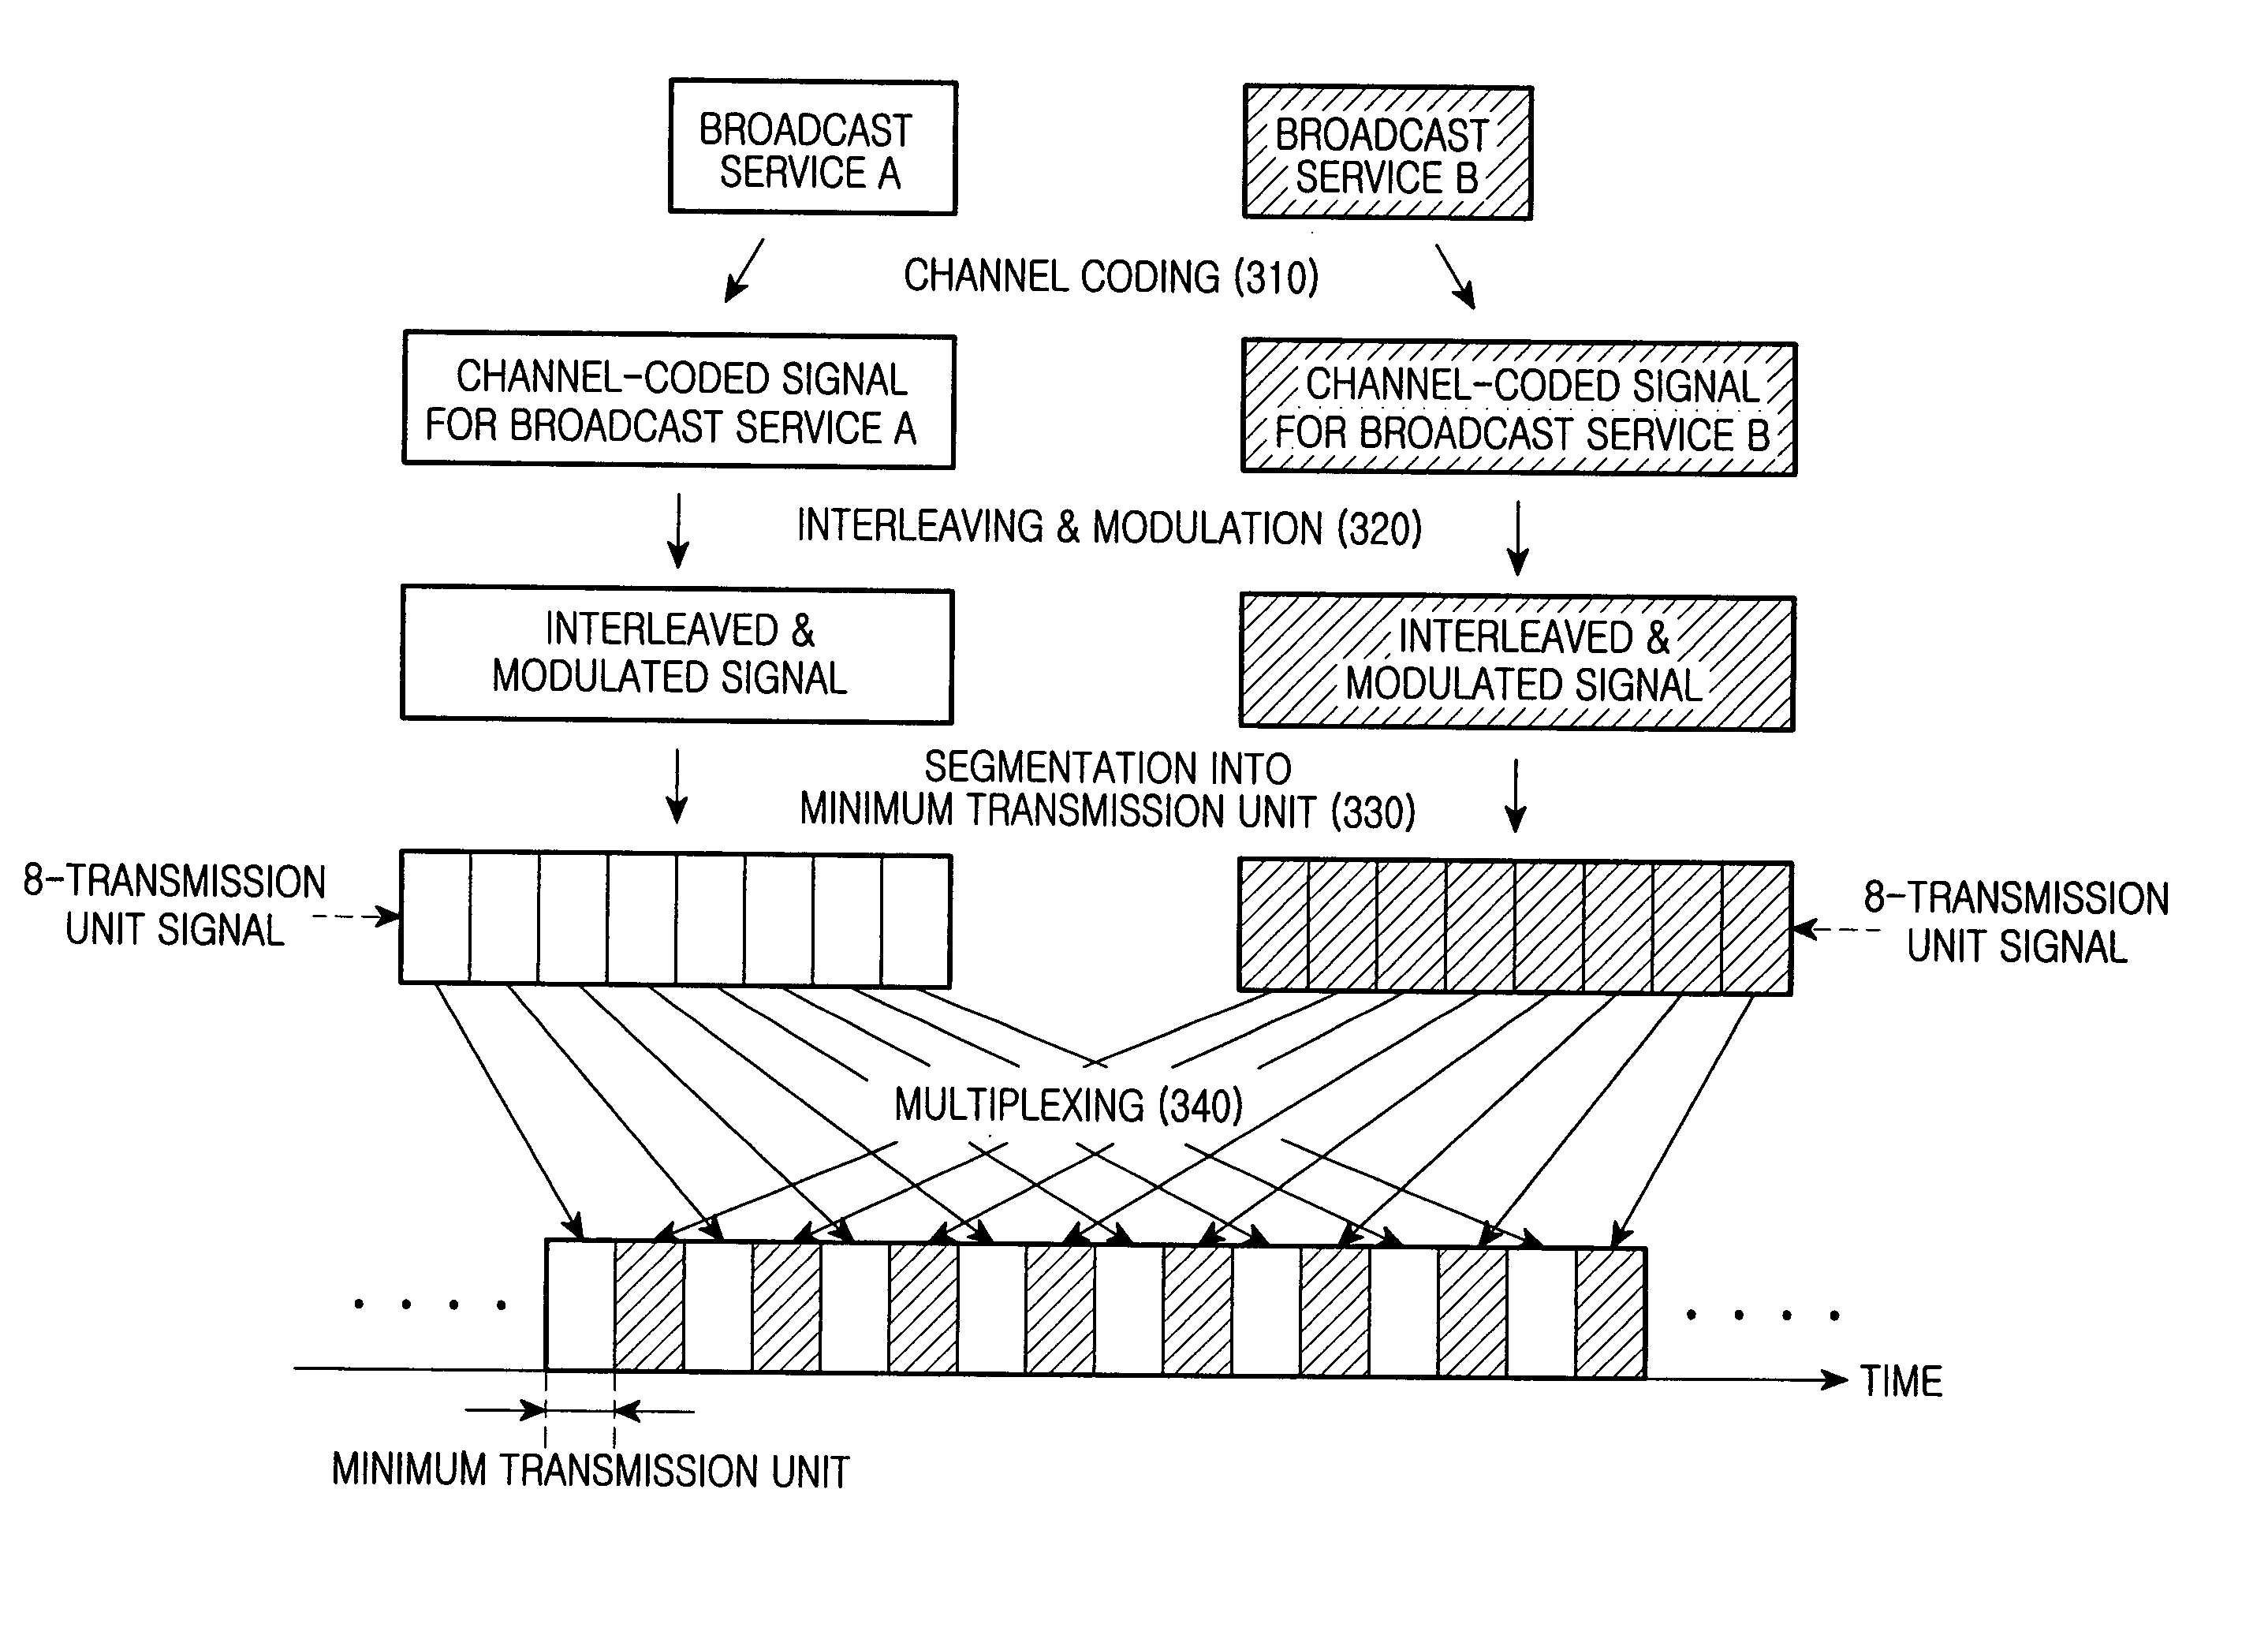 Method for transmitting and receiving broadcast service data in an OFDMA wireless communication system